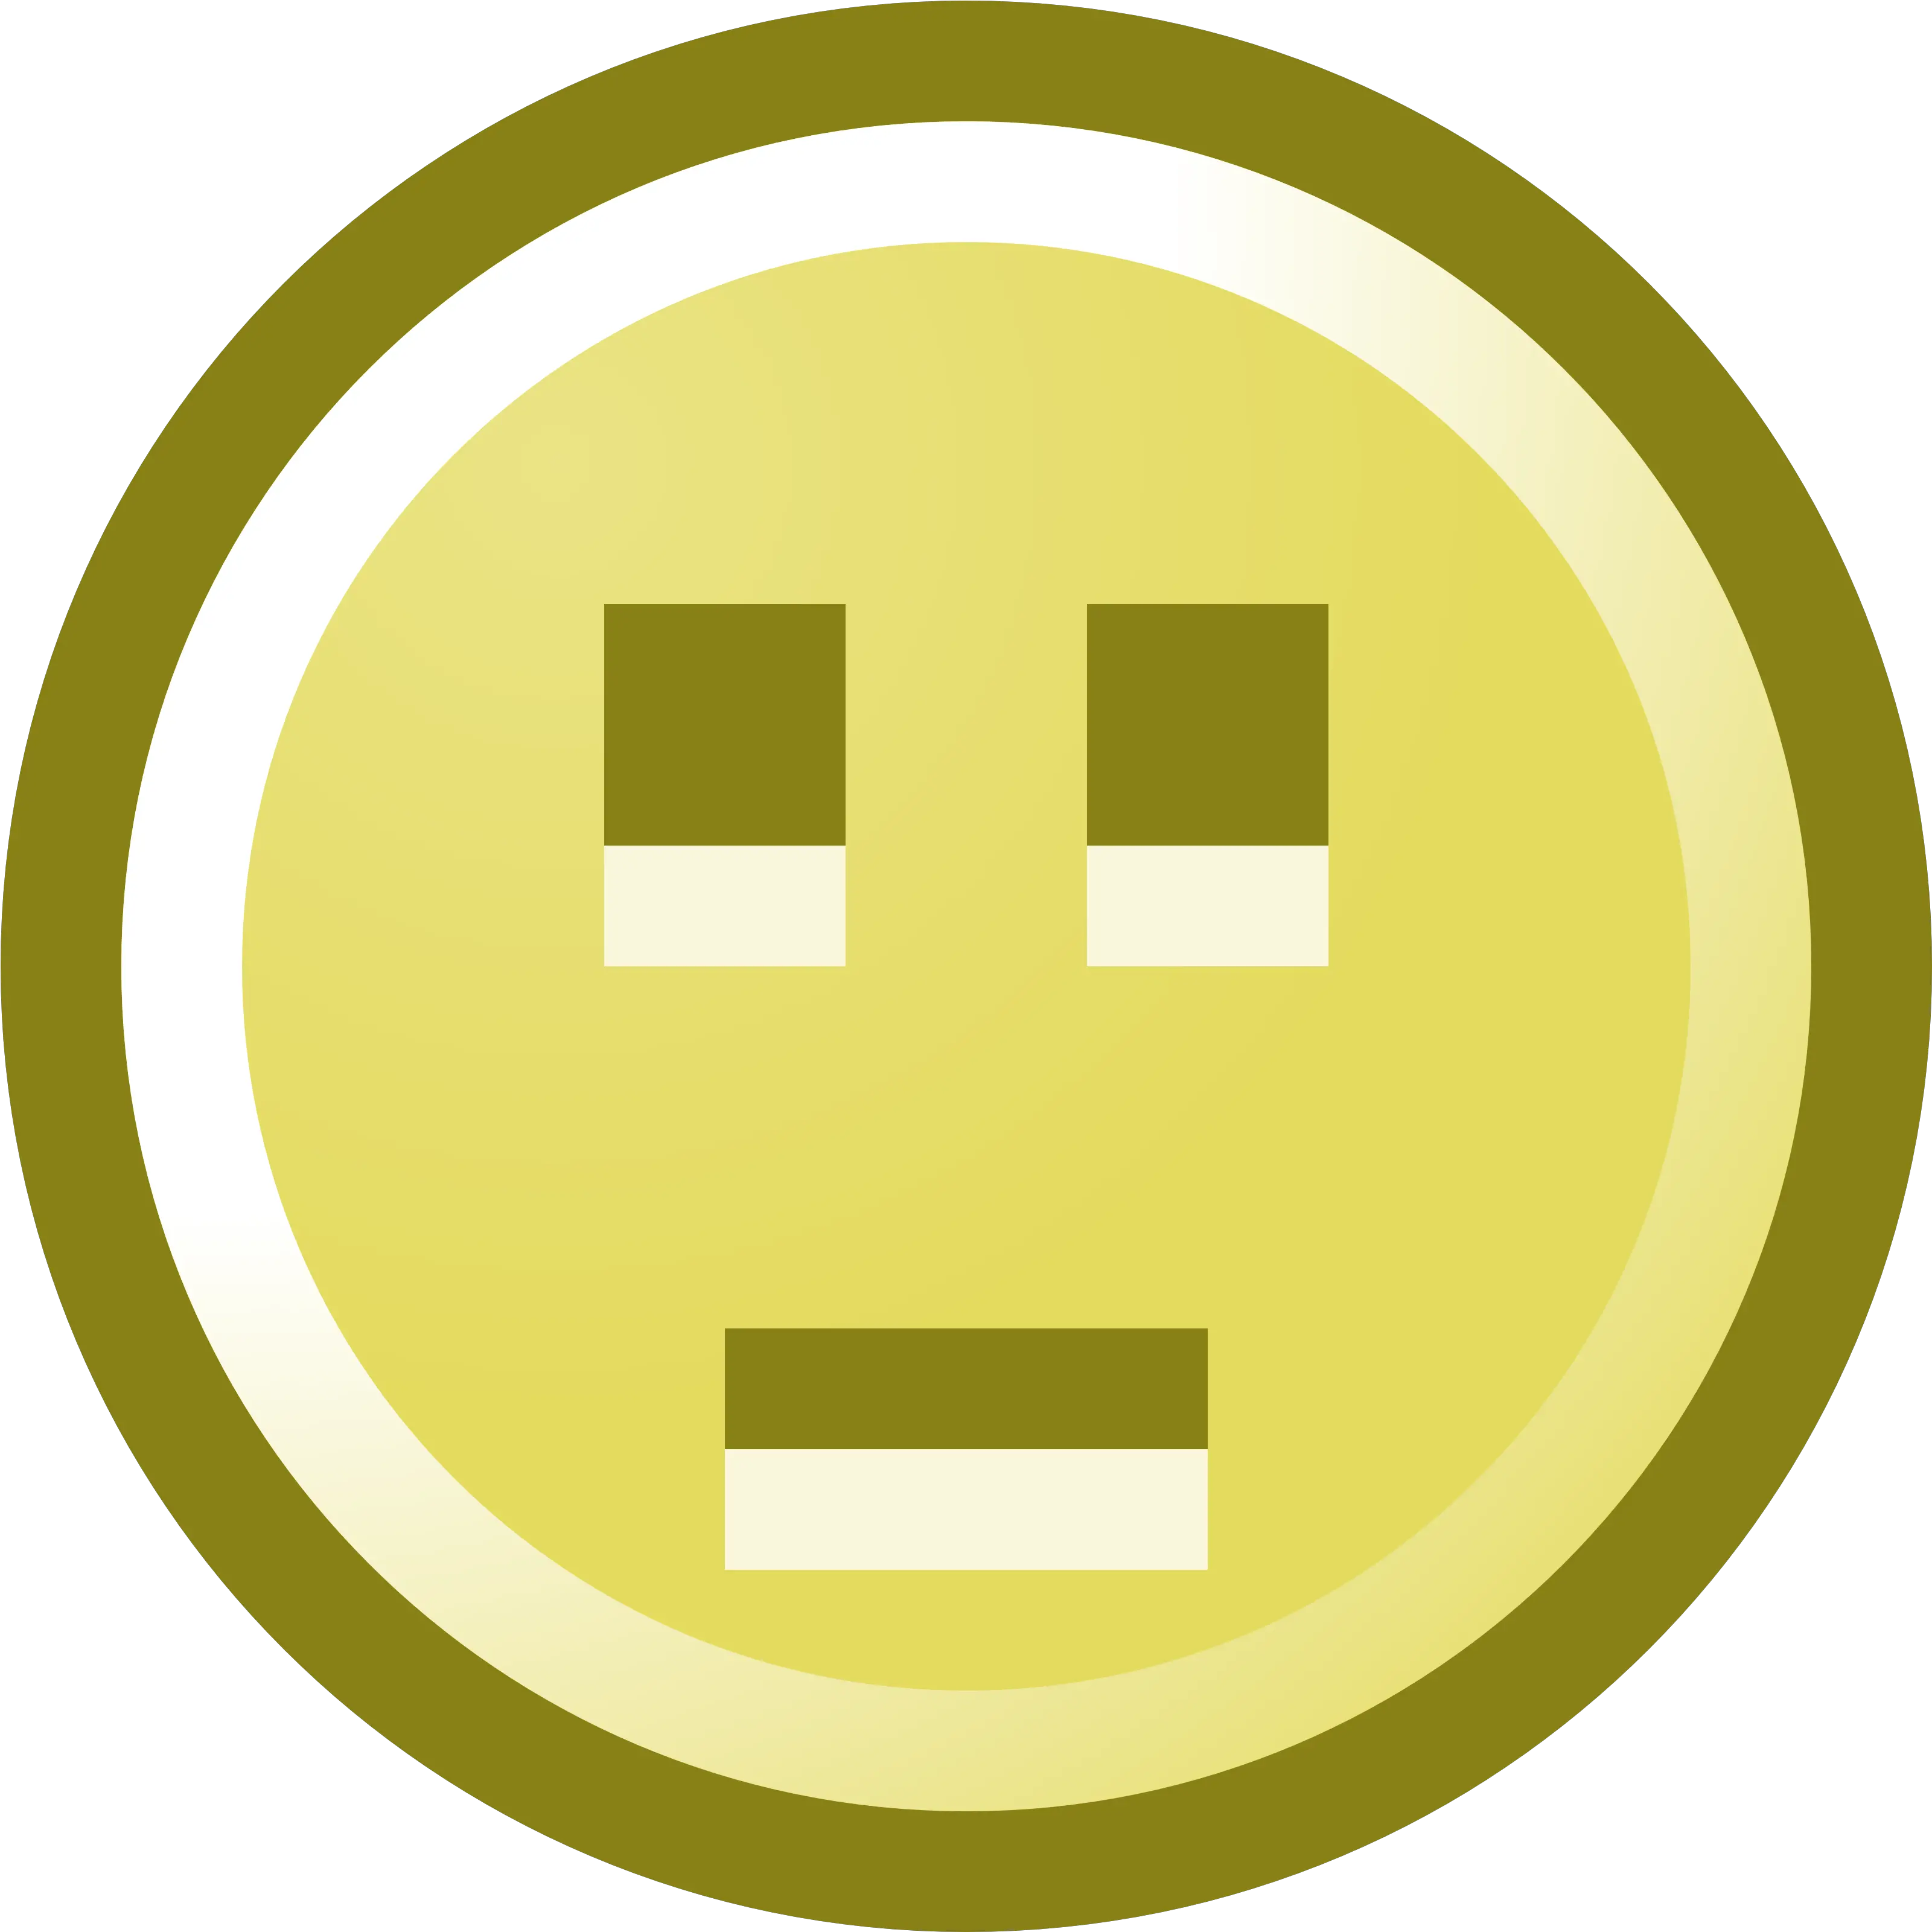 Sick Smiley Face Drawing Free Image Download Stoic Clipart Png Sick Face Icon